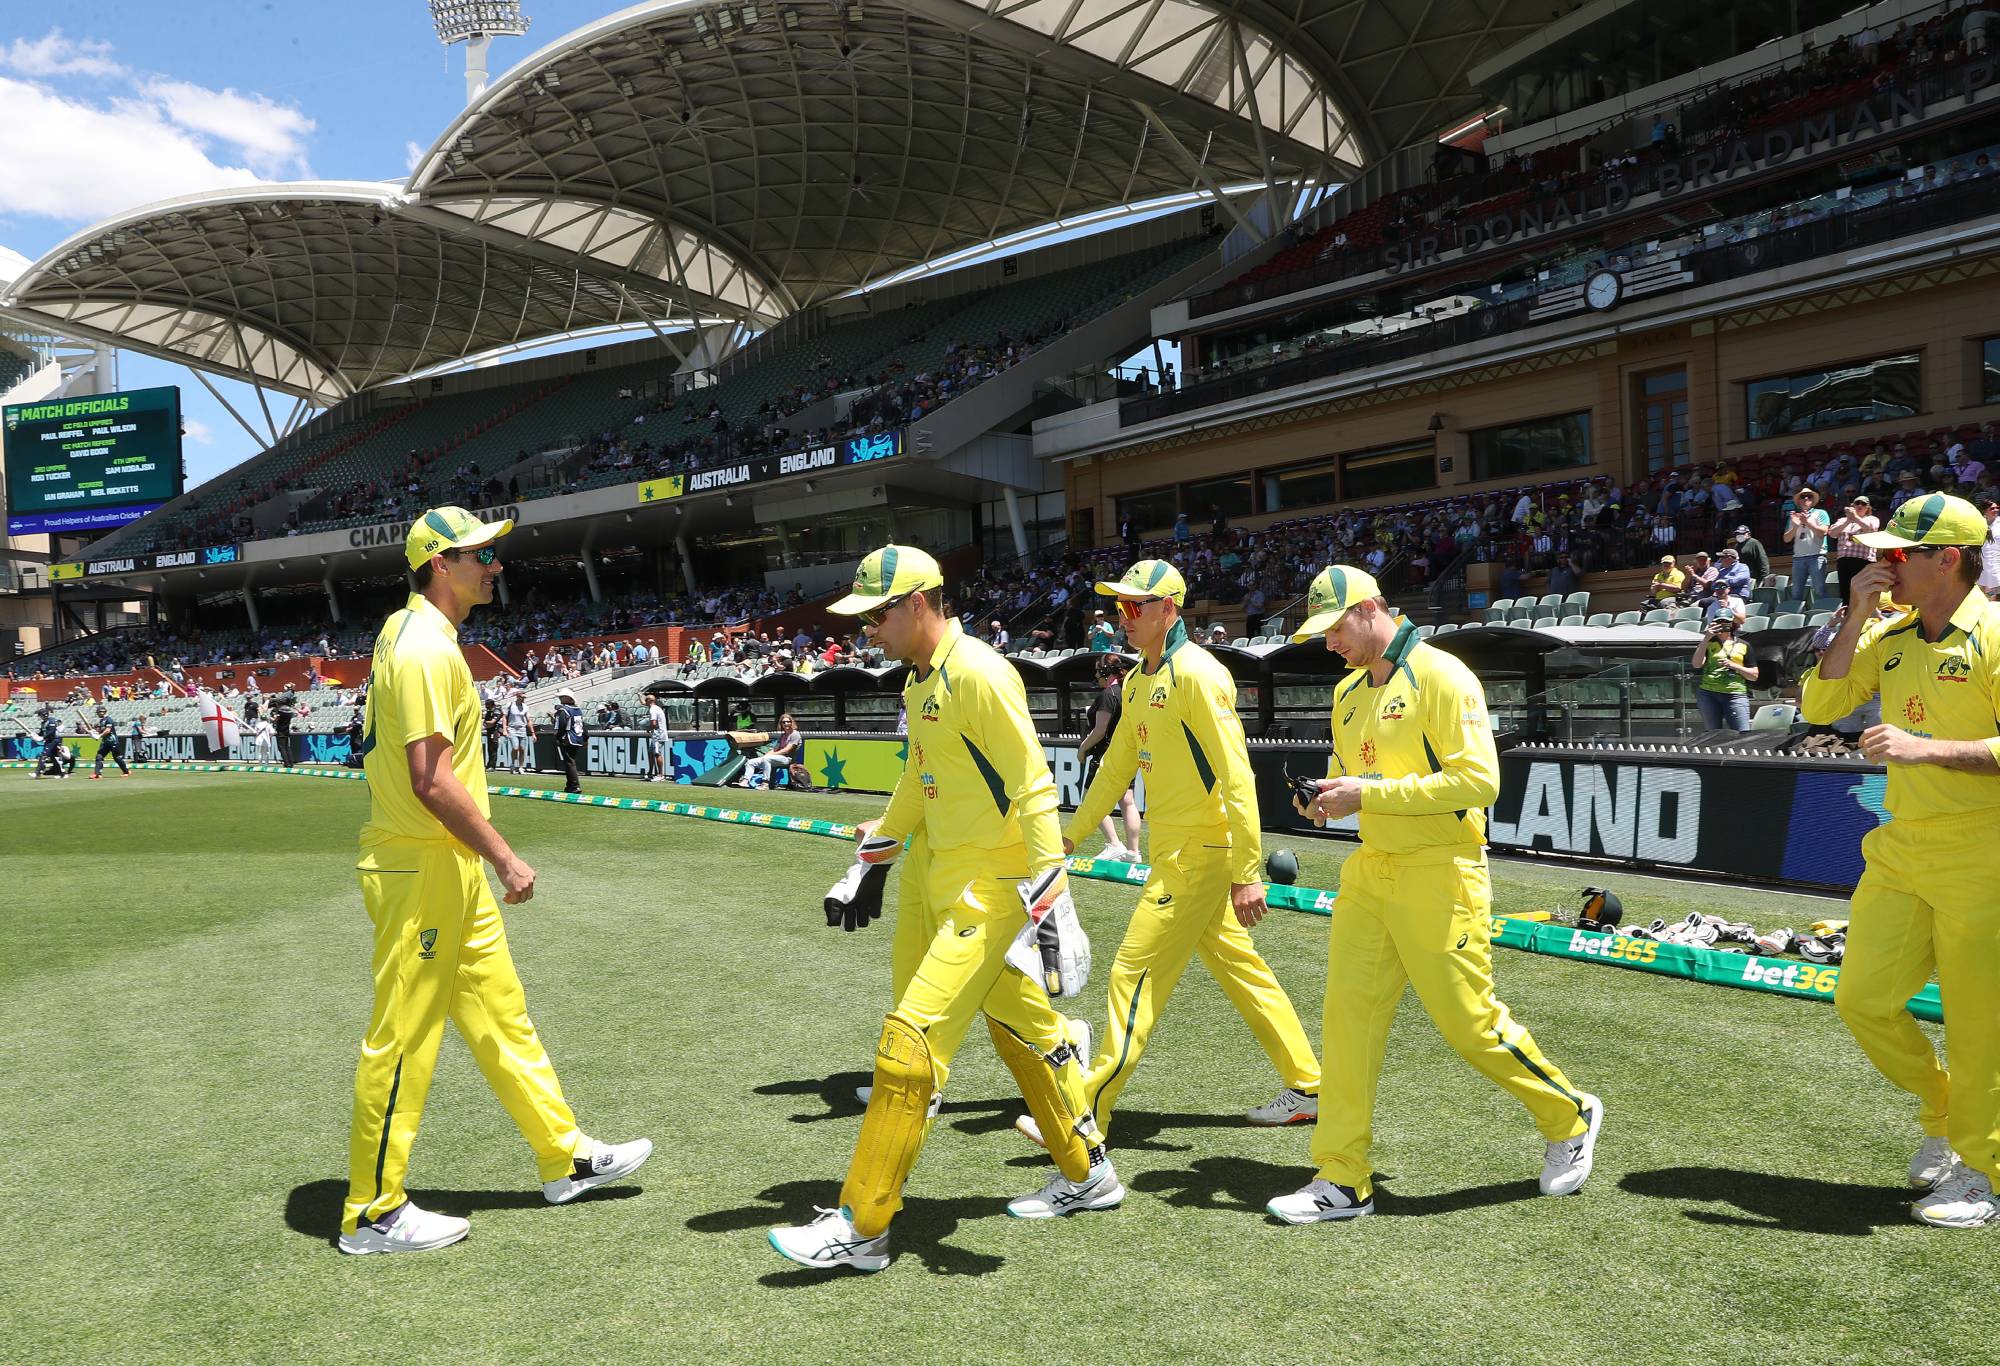 ADELAIDE, AUSTRALIA - NOVEMBER 17:  Patrick Cummins of Australia leads Australia out during game one of the One Day International series between Australia and England at Adelaide Oval on November 17, 2022 in Adelaide, Australia. (Photo by Sarah Reed/Getty Images)